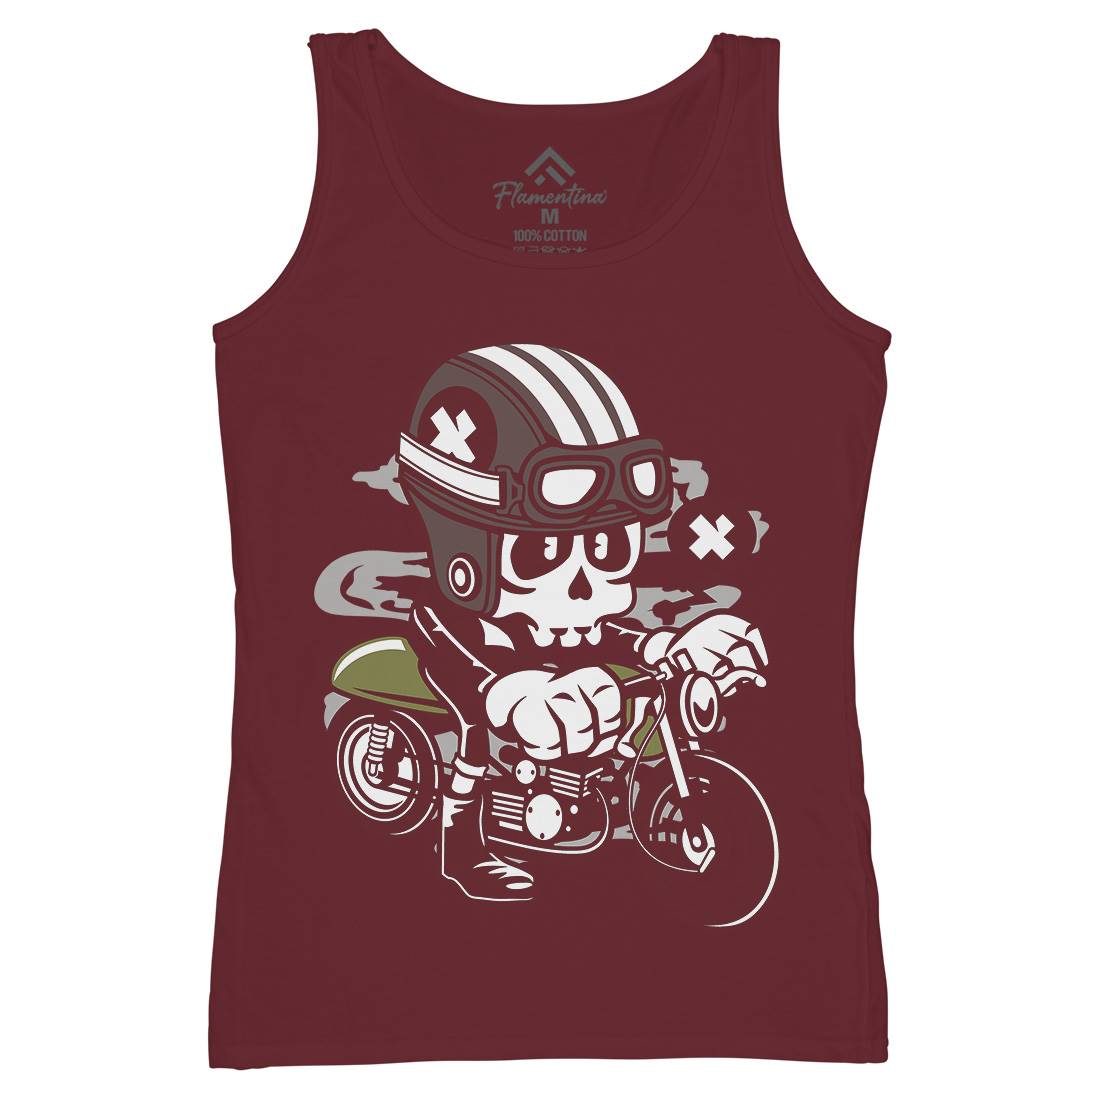 Caferacer Skull Womens Organic Tank Top Vest Motorcycles C039